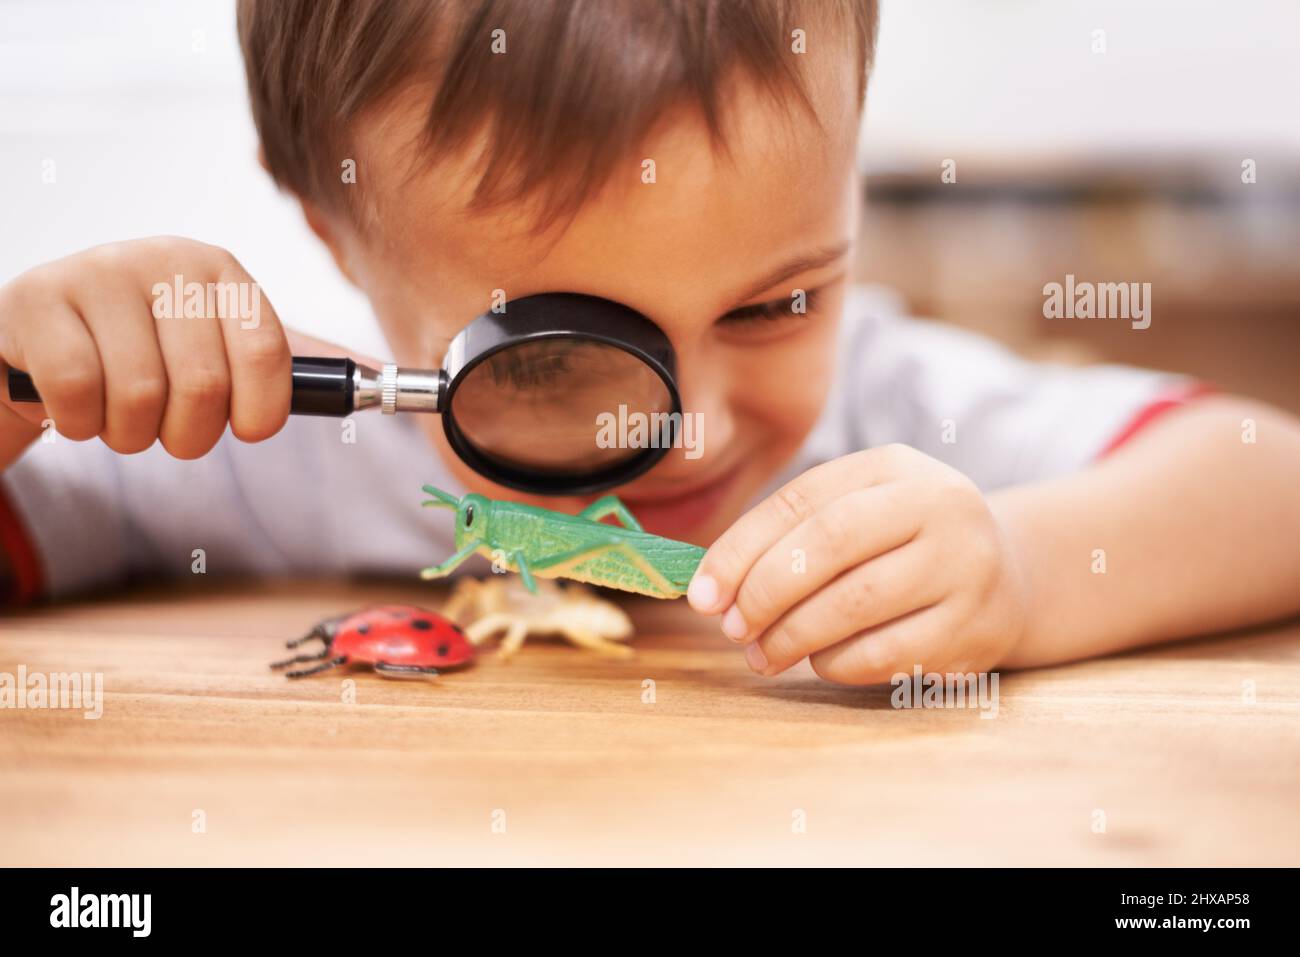 Inspecting some curious creatures. Shot of a young boy inspecting his toys with a magnifying glass. Stock Photo